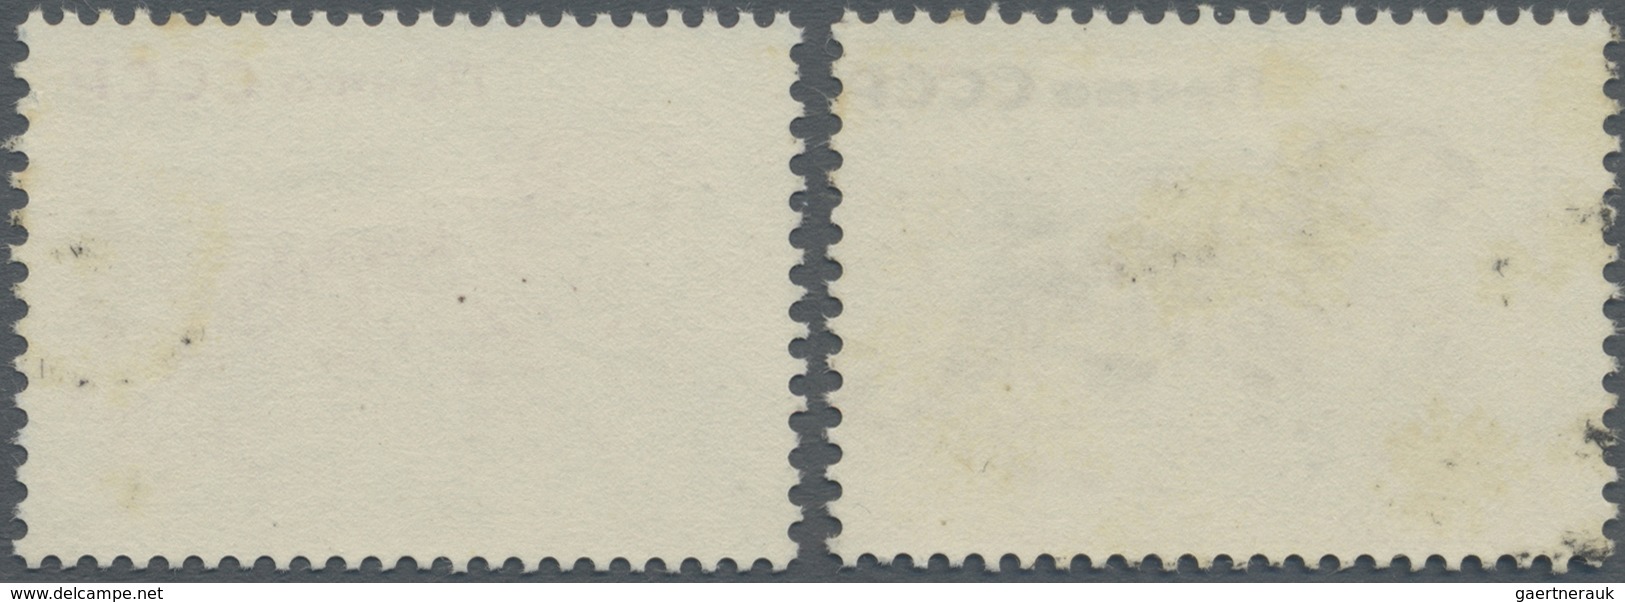 ** Sowjetunion: 1970, Two Proofs, Probably For The 20 Kop. Siberian Tiger Issue. - Lettres & Documents